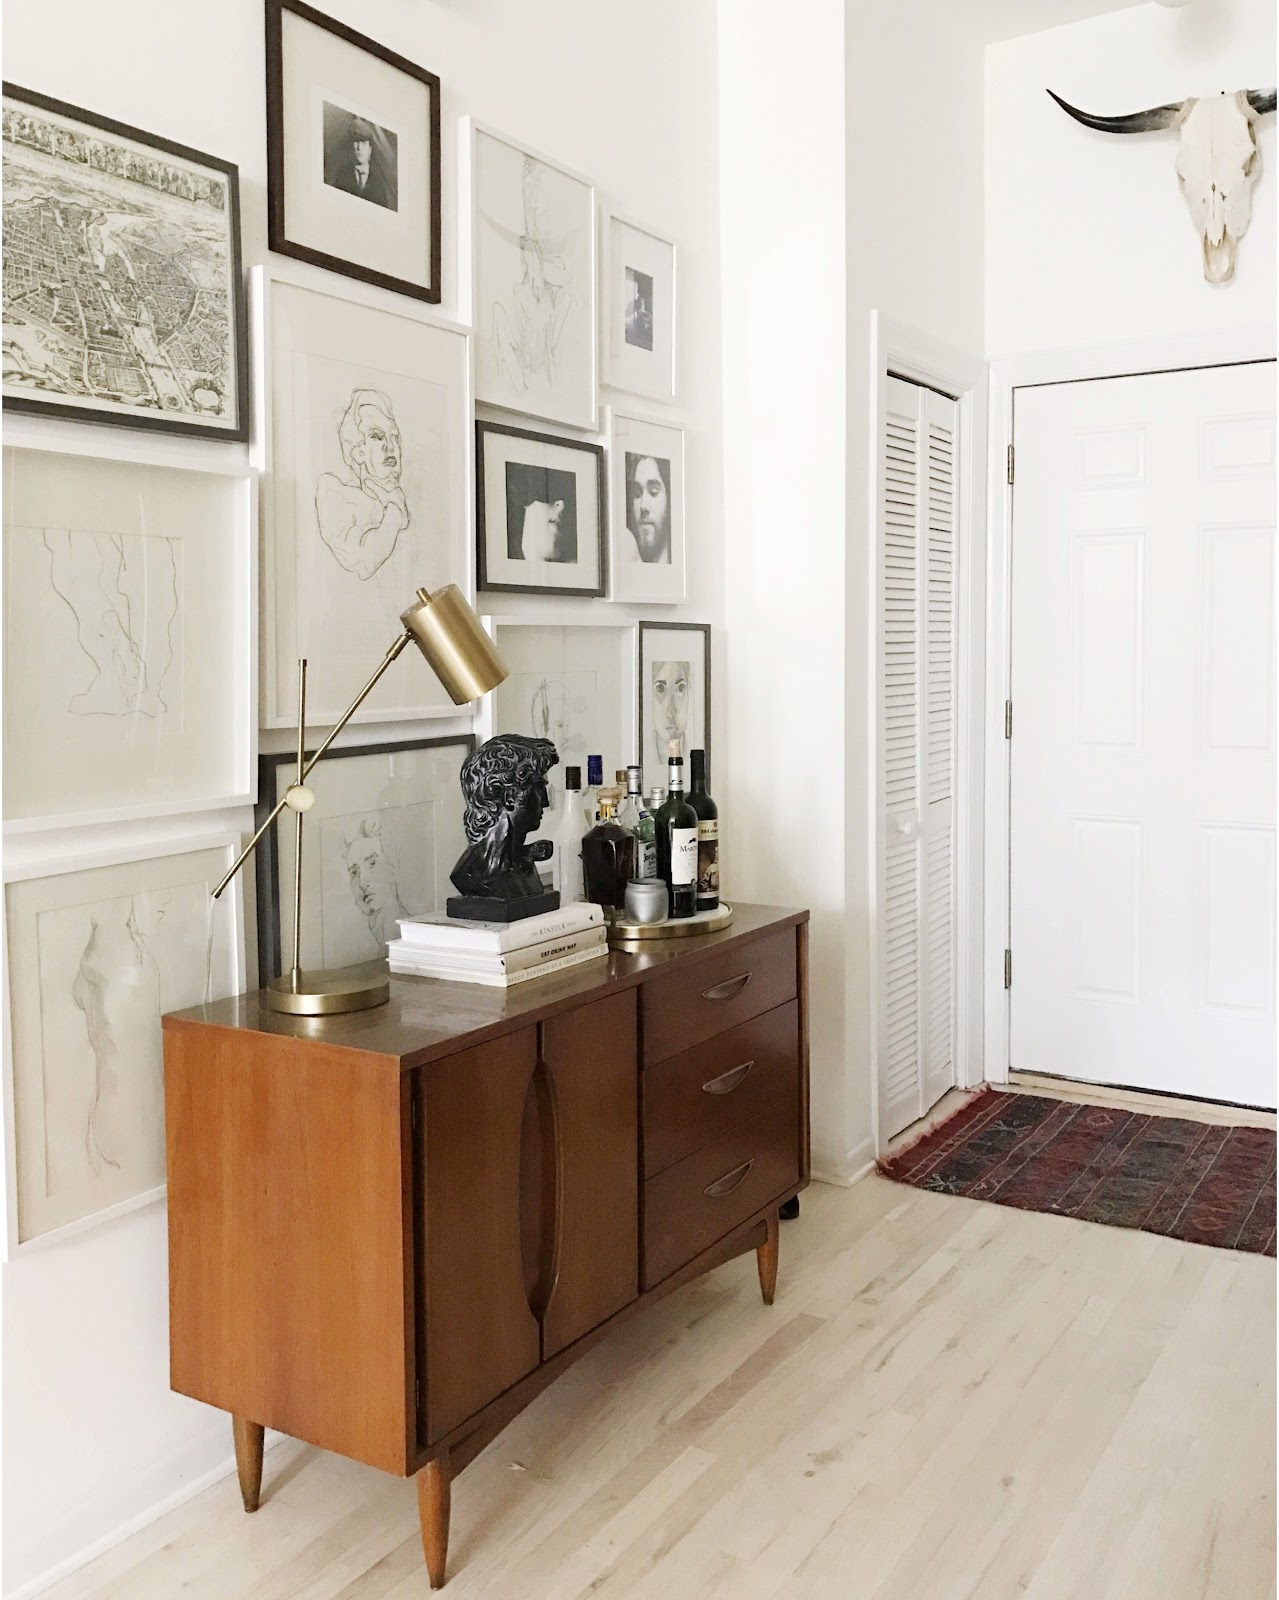 Vintage sideboards for every lifestyle, budget and taste